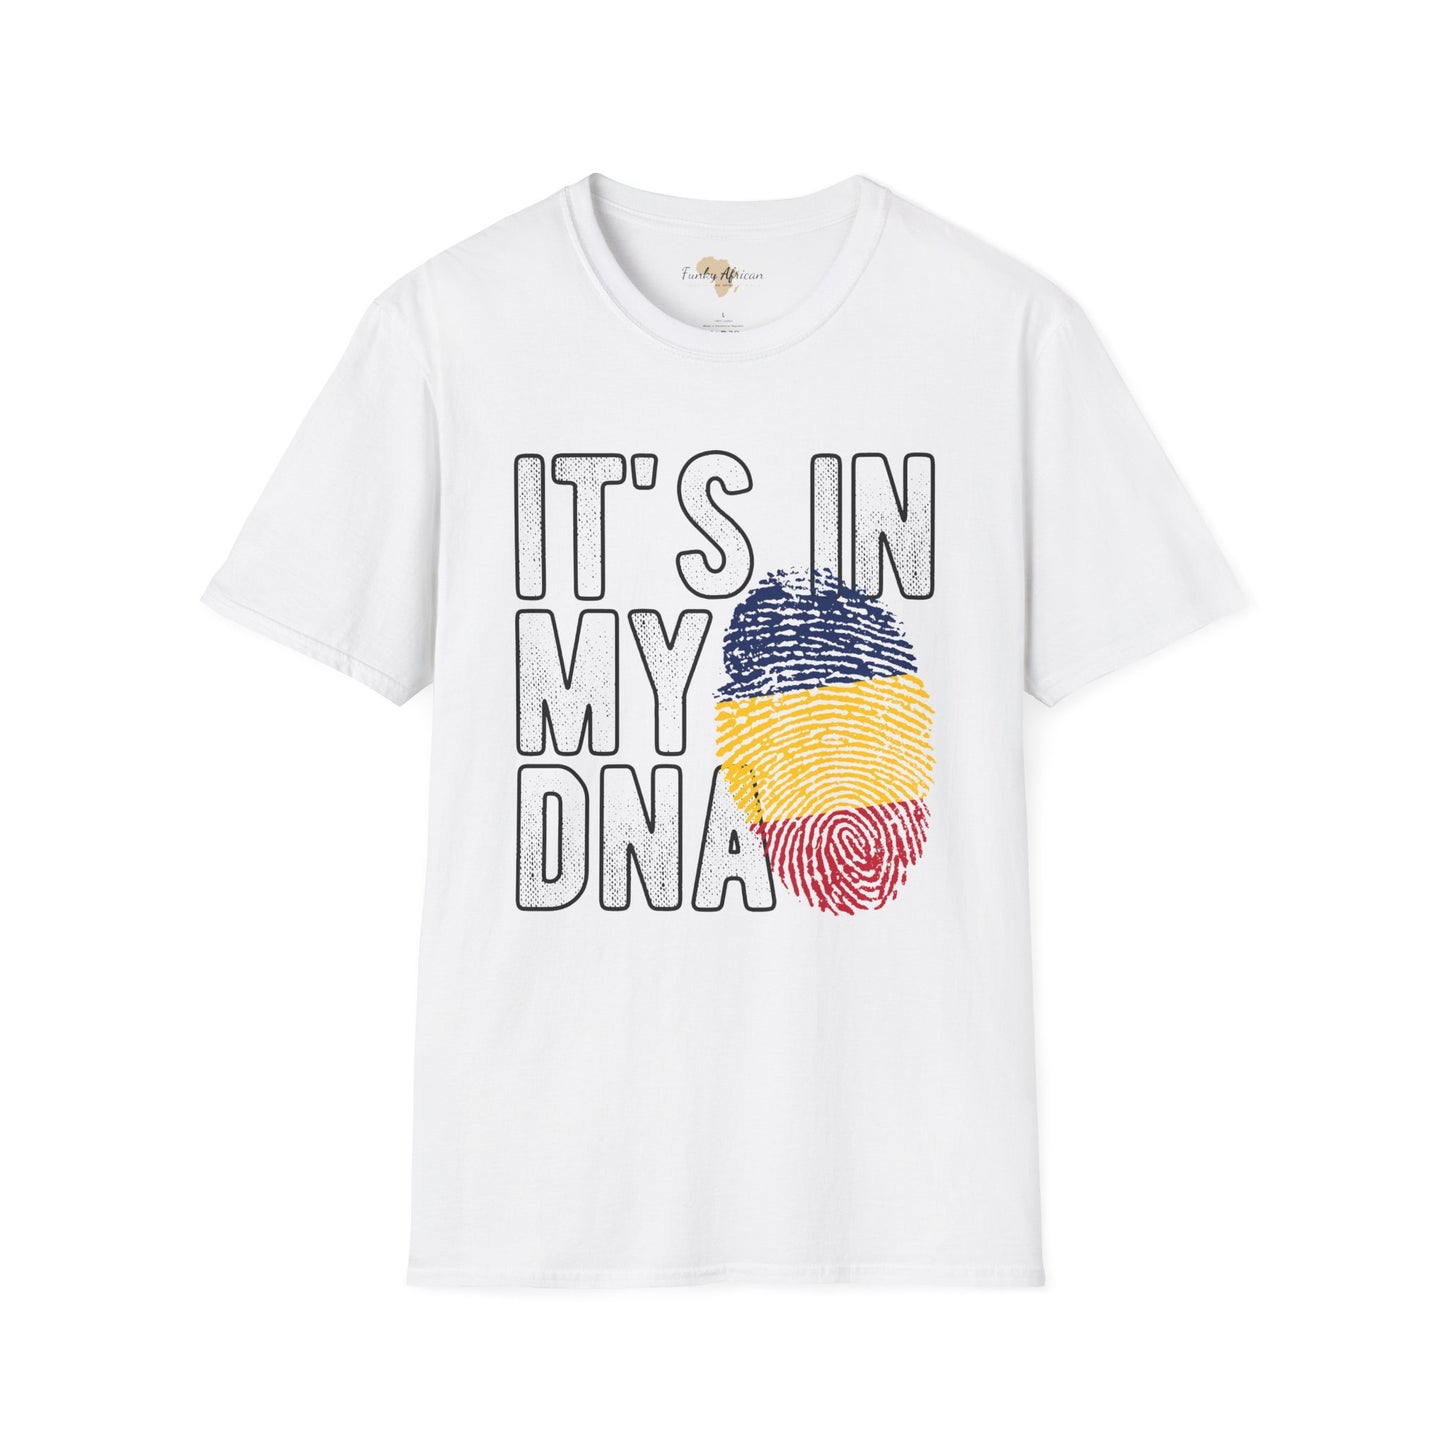 it's in my DNA unisex tee - Chad